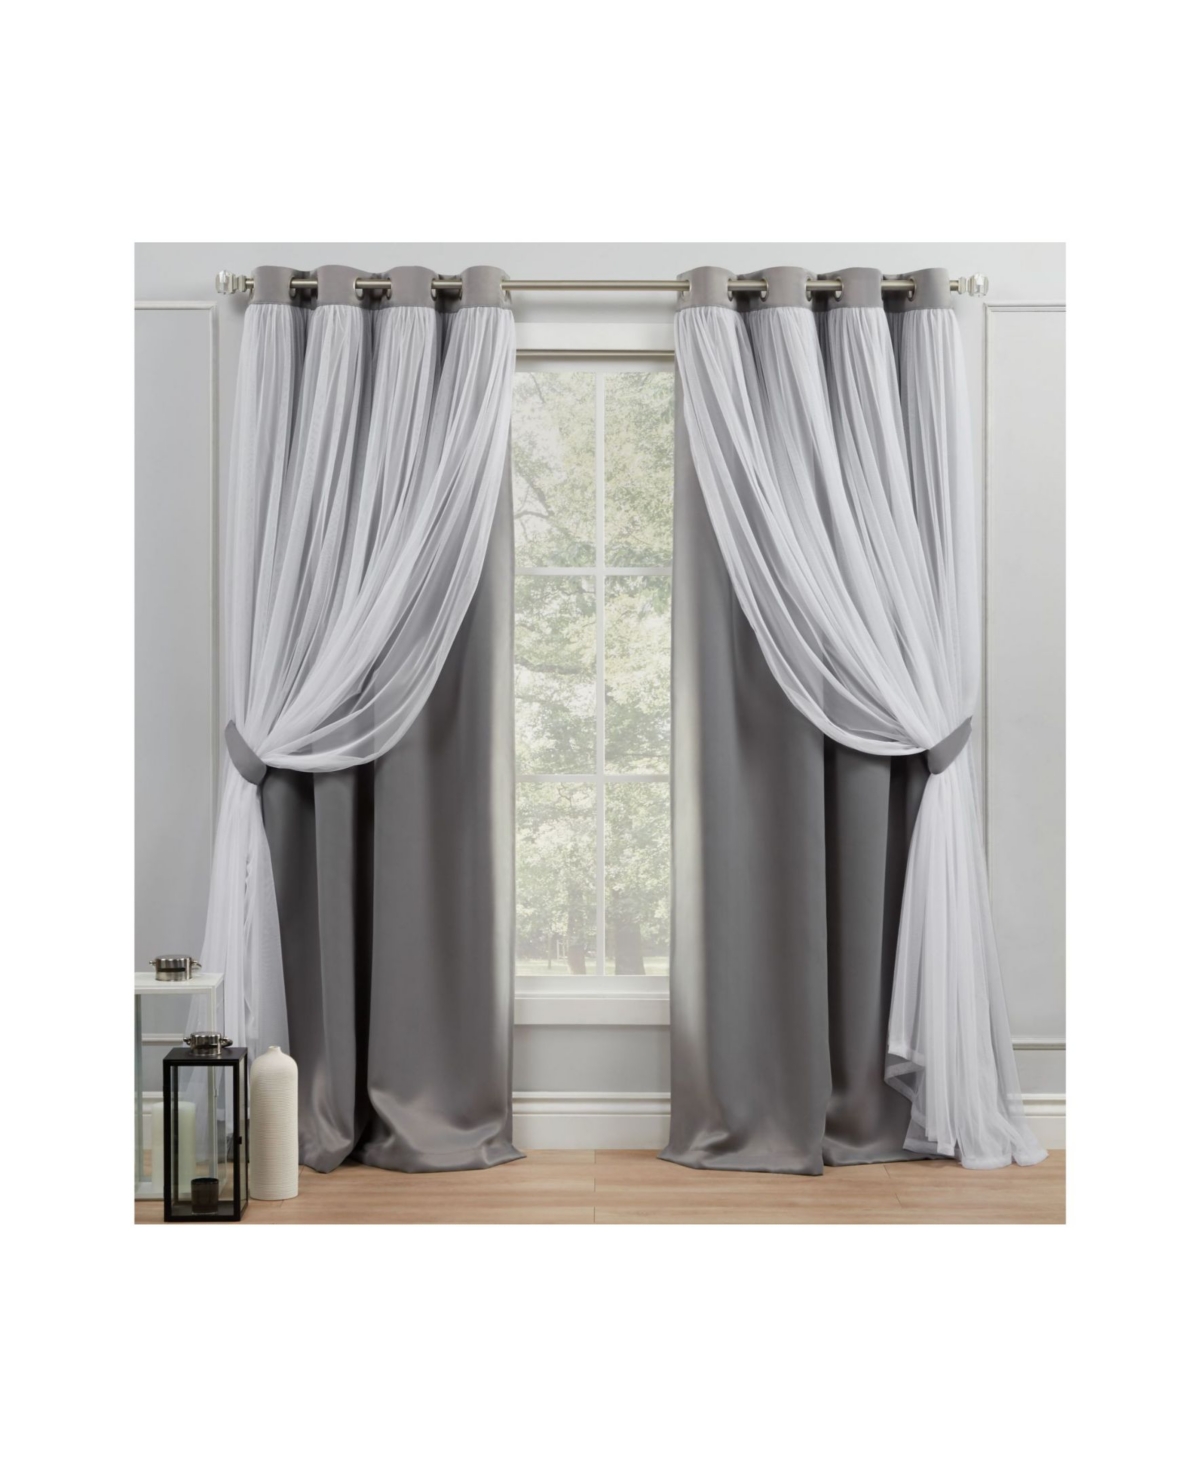 Curtains Catarina Layered Solid Blackout and Sheer Grommet Top Curtain Panel Pair, 52" x 108" - Dark Gray